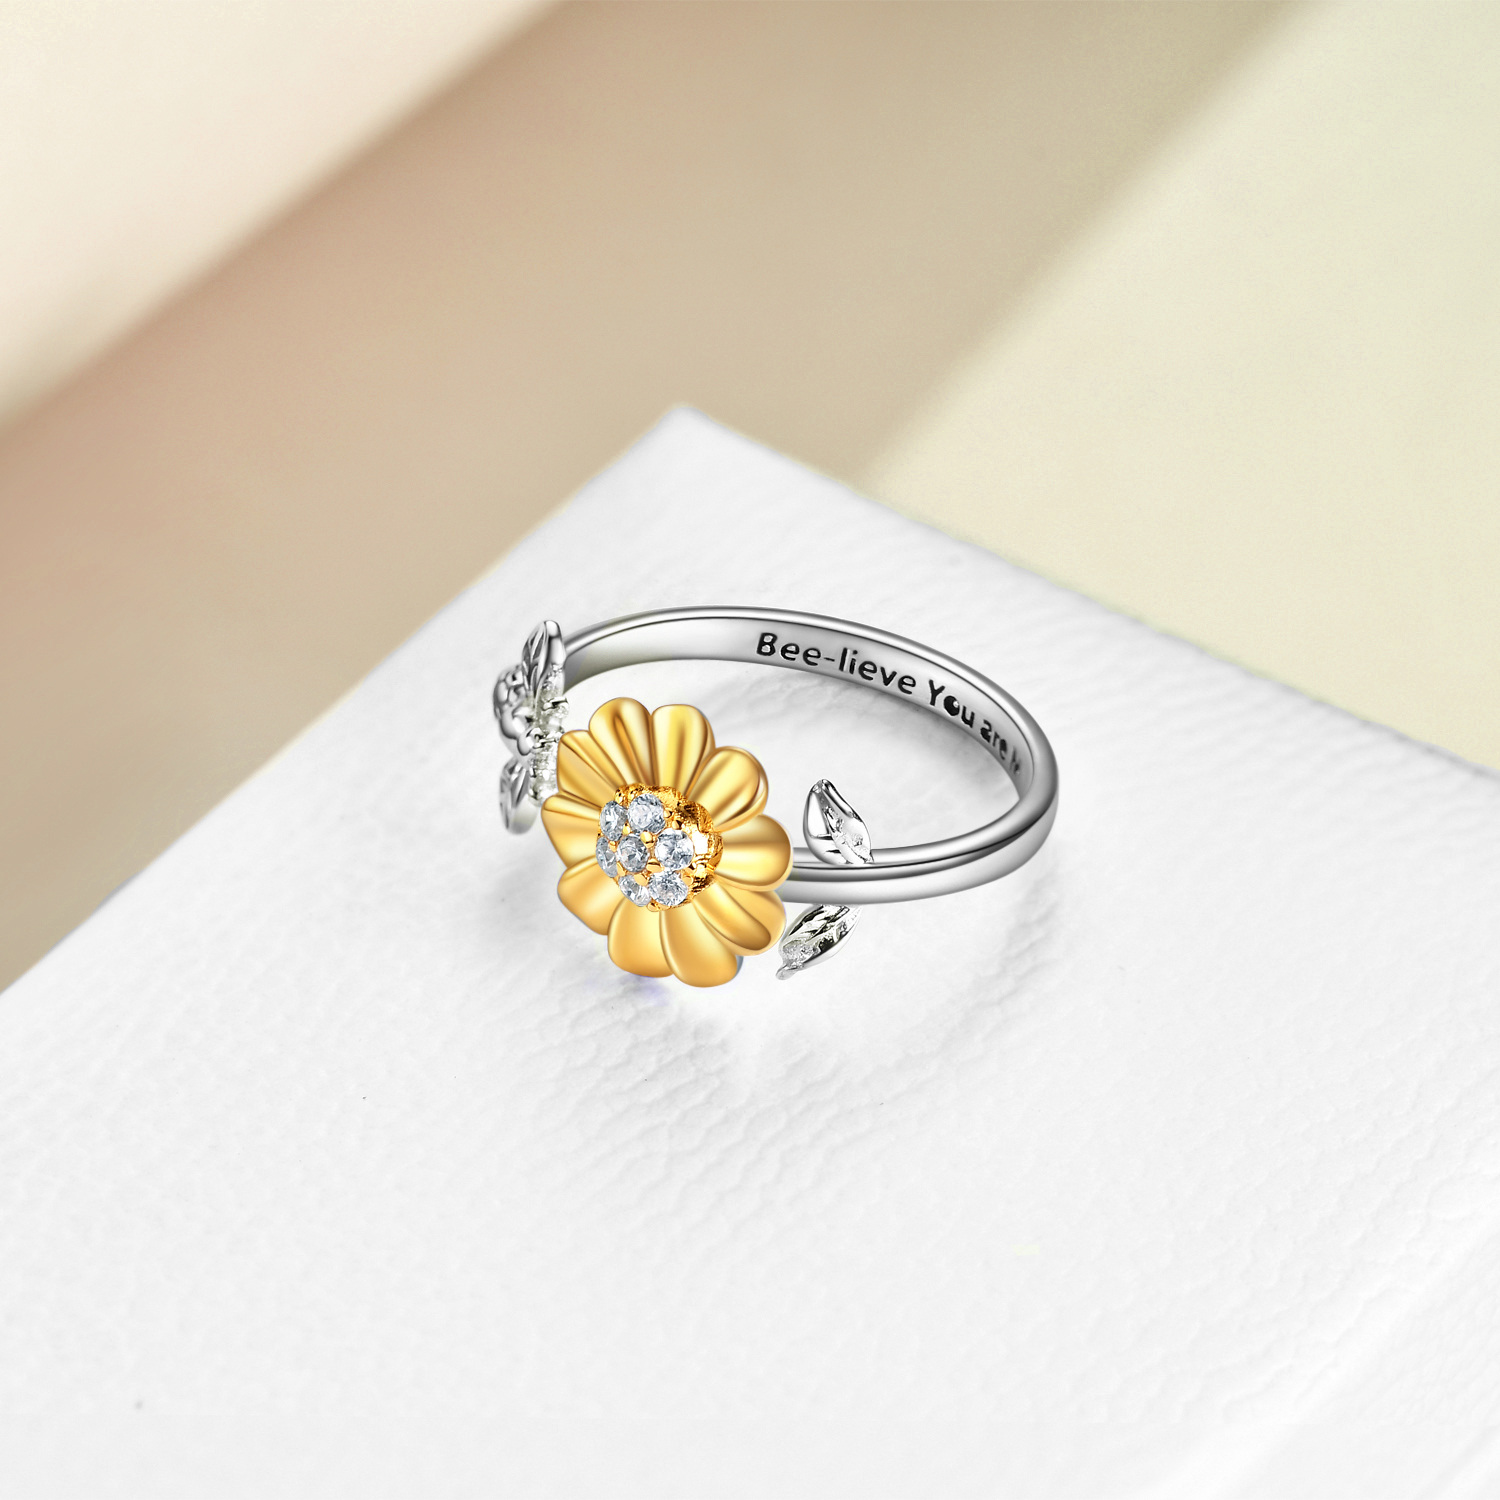 d7c0818c9788bb81d4b27ed99b0a423bPYJ04002 - Sterling Silver Sunflower with Bee-live You Are My Sunshine Open Adjustable Ring